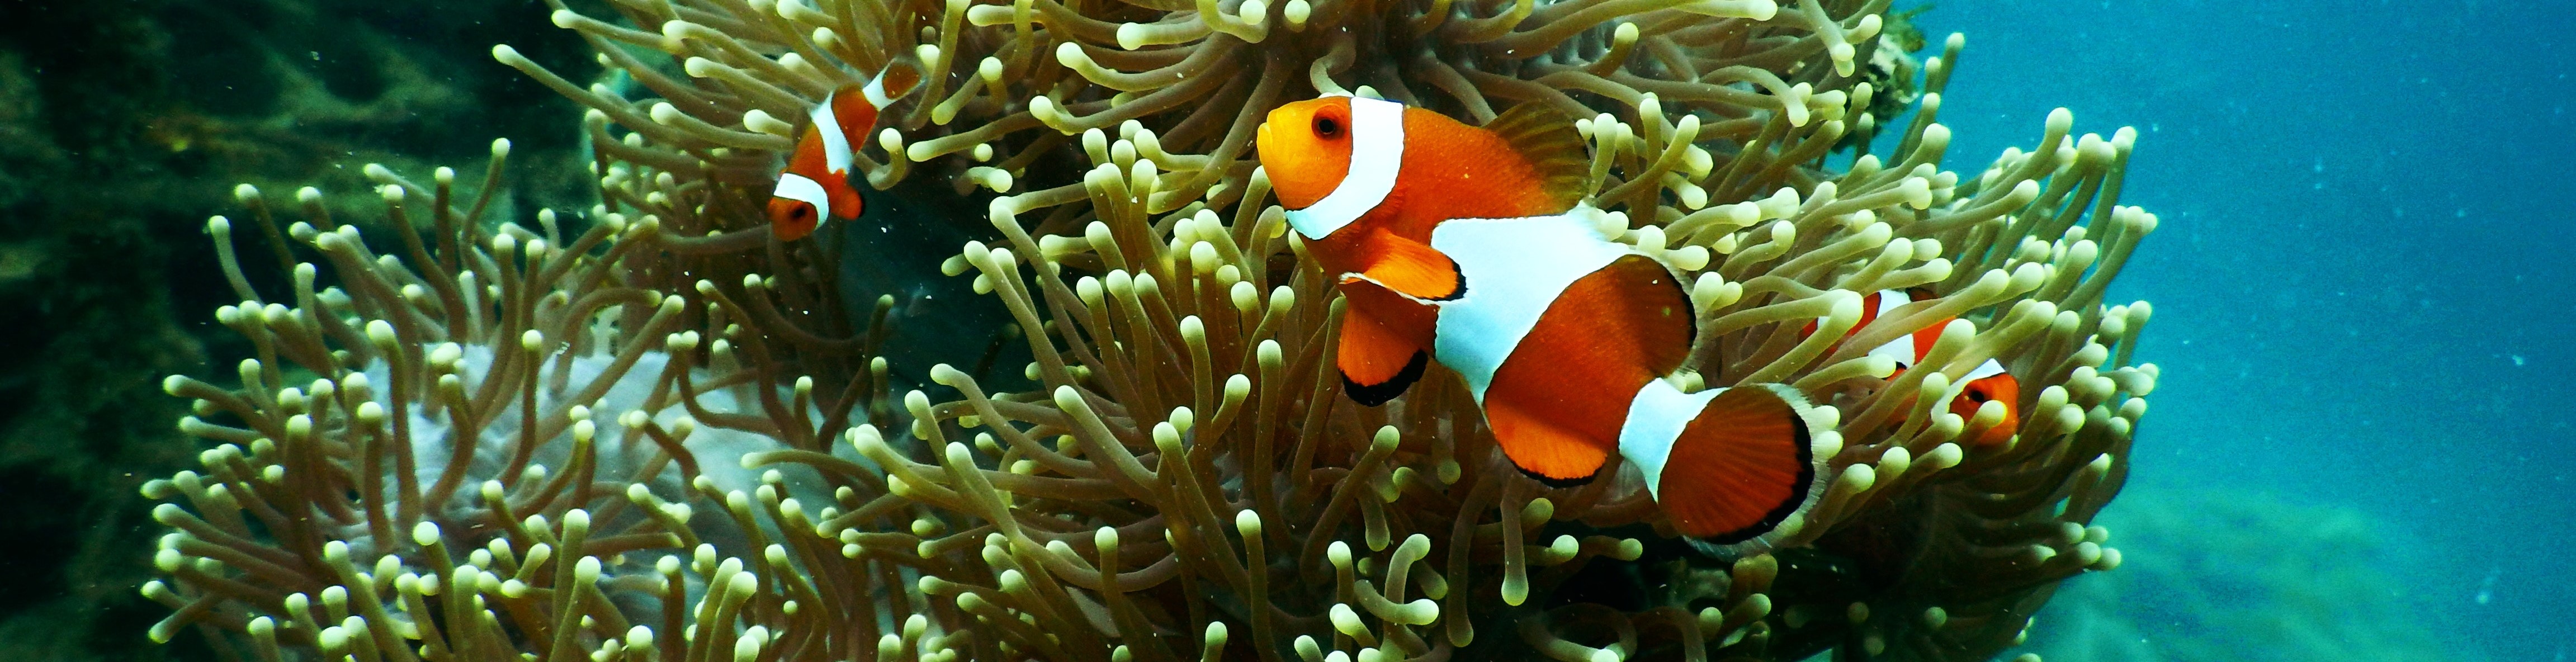 Clown fish swimming in a coral reef